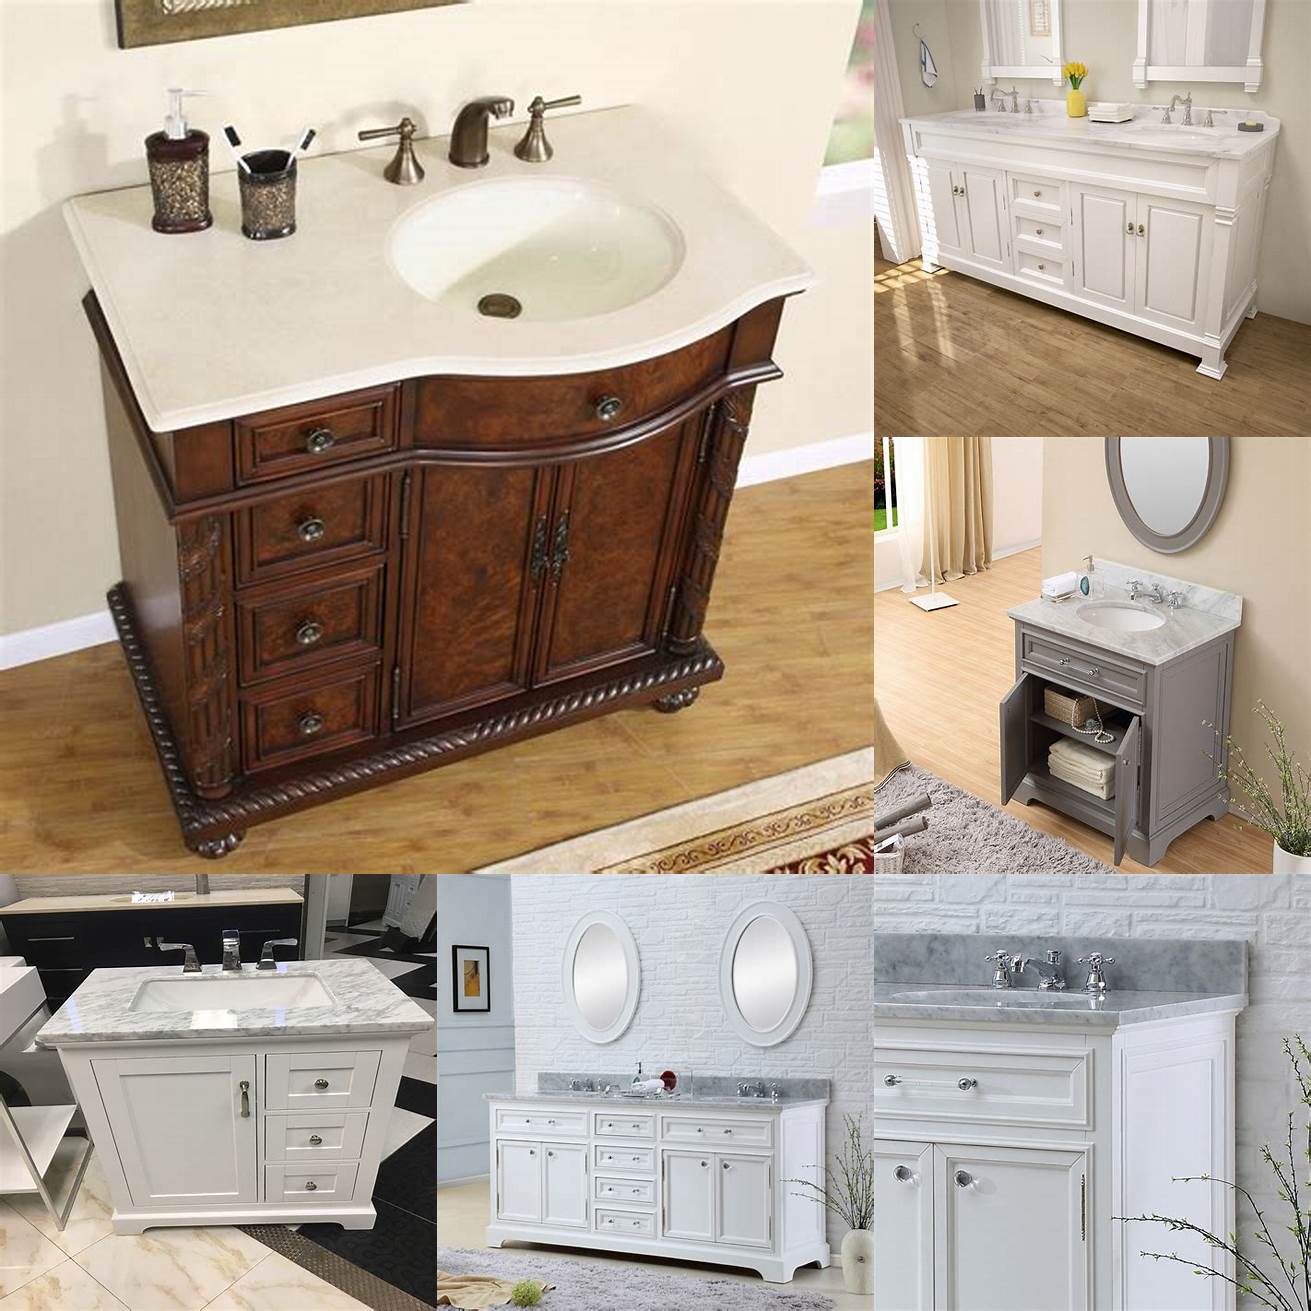 Traditional freestanding sink cabinet with marble countertop